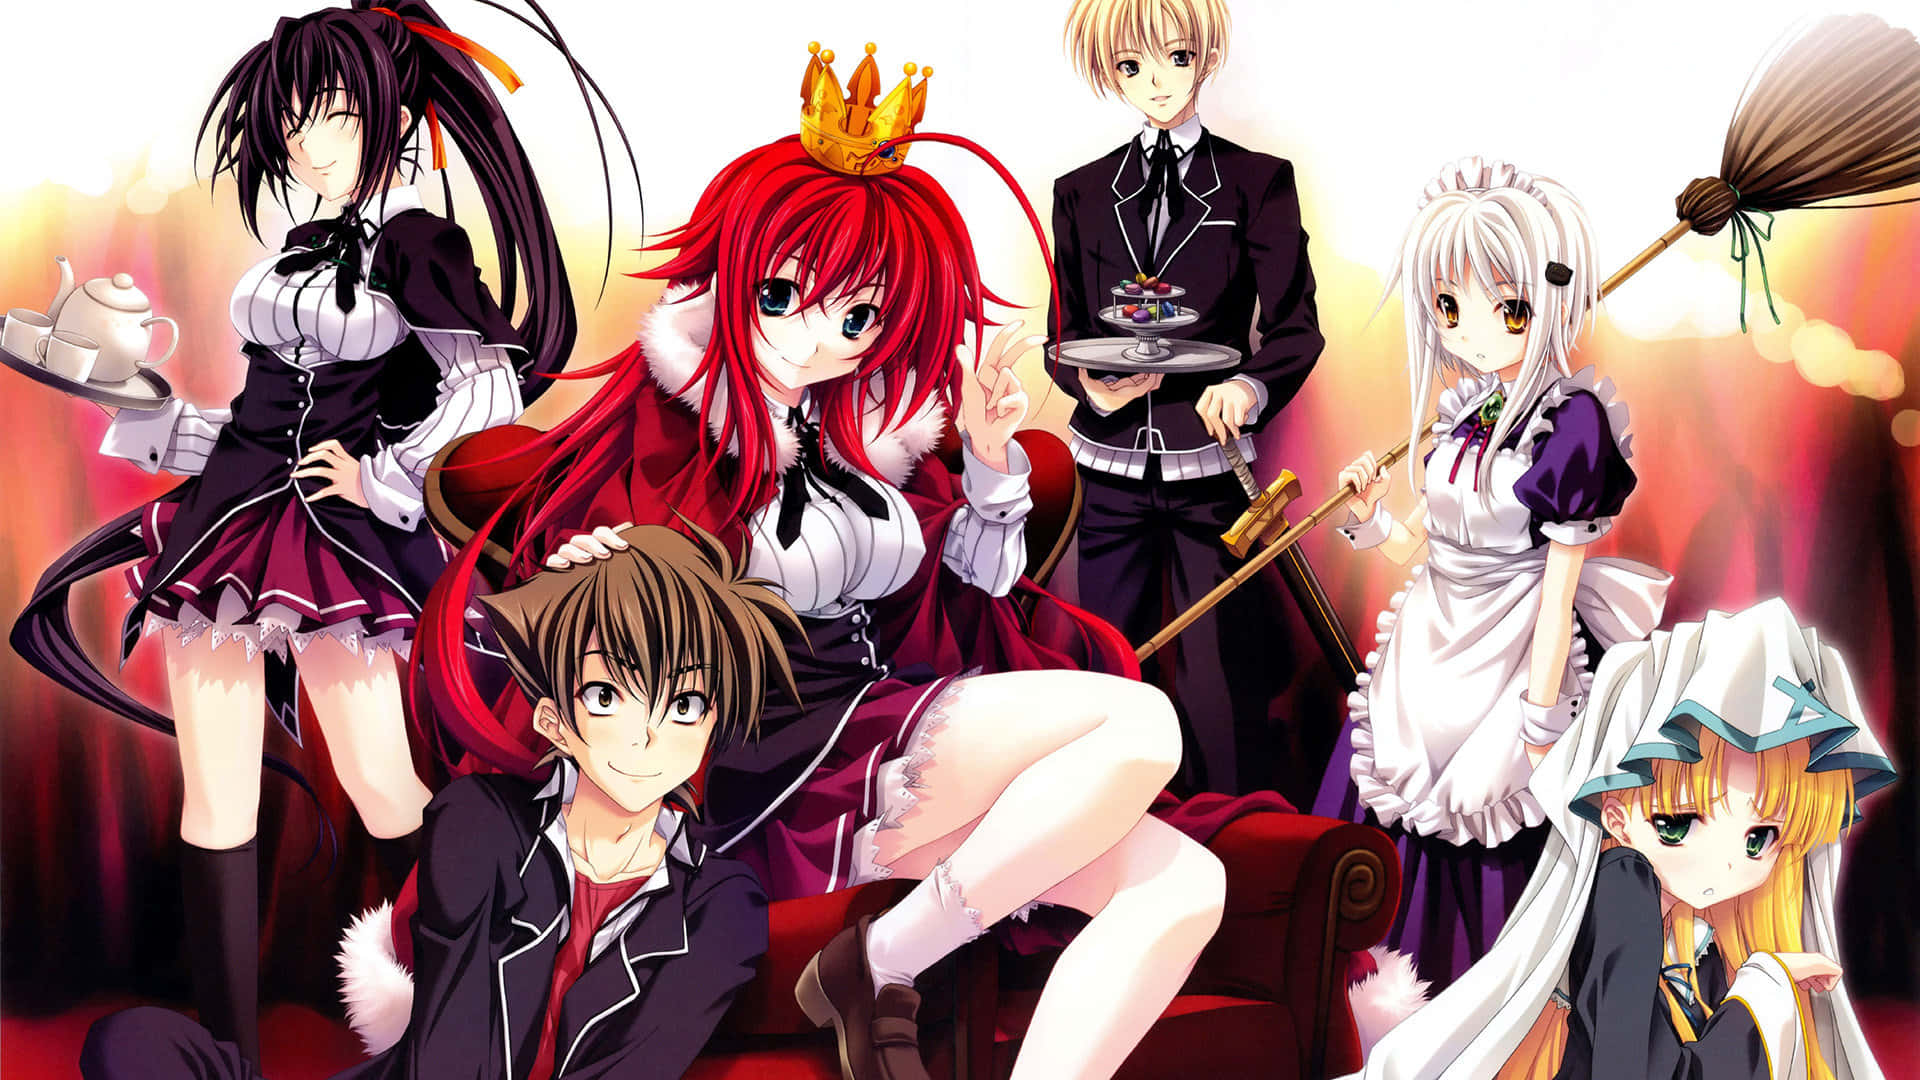 Download Enjoy the action-packed adventures of Highschool Dxd